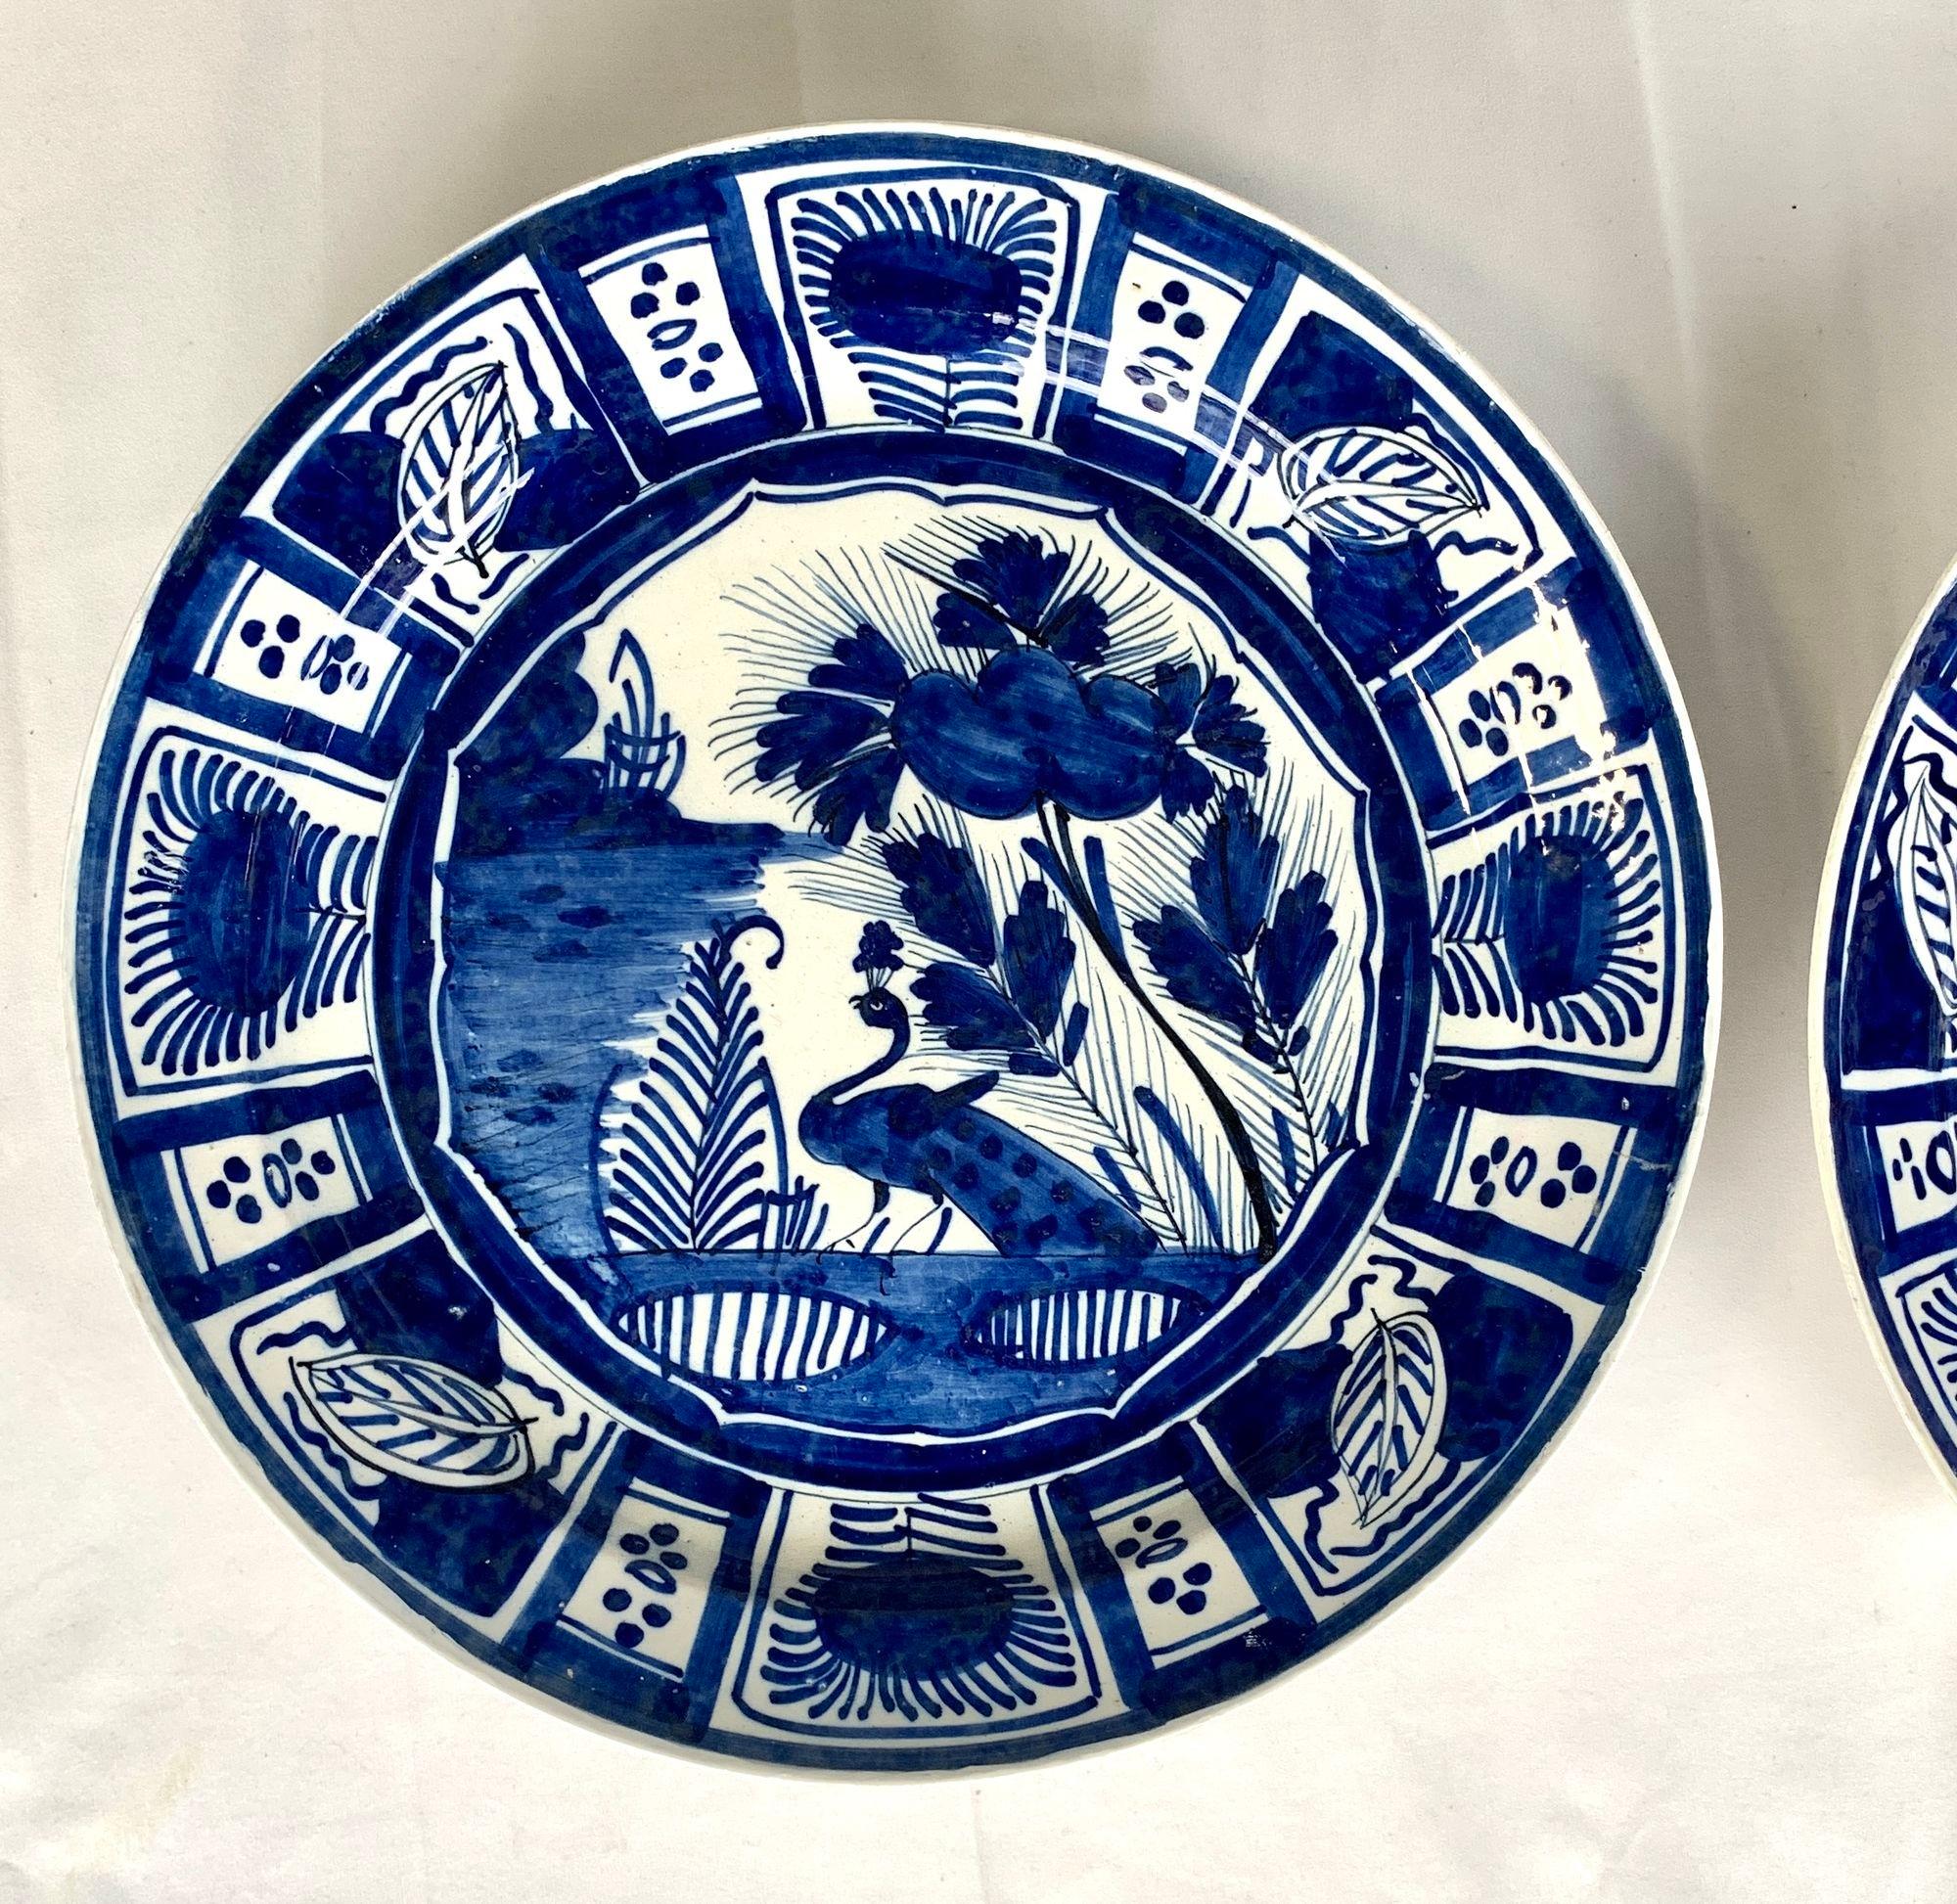 This pair of mid-18th-century Dutch Delft chargers is handpainted in several shades of cobalt blue.
The viewer is drawn to the lovely scene in the center of each charger, which shows an elegant peacock in a flowery garden near water.
The wide rim